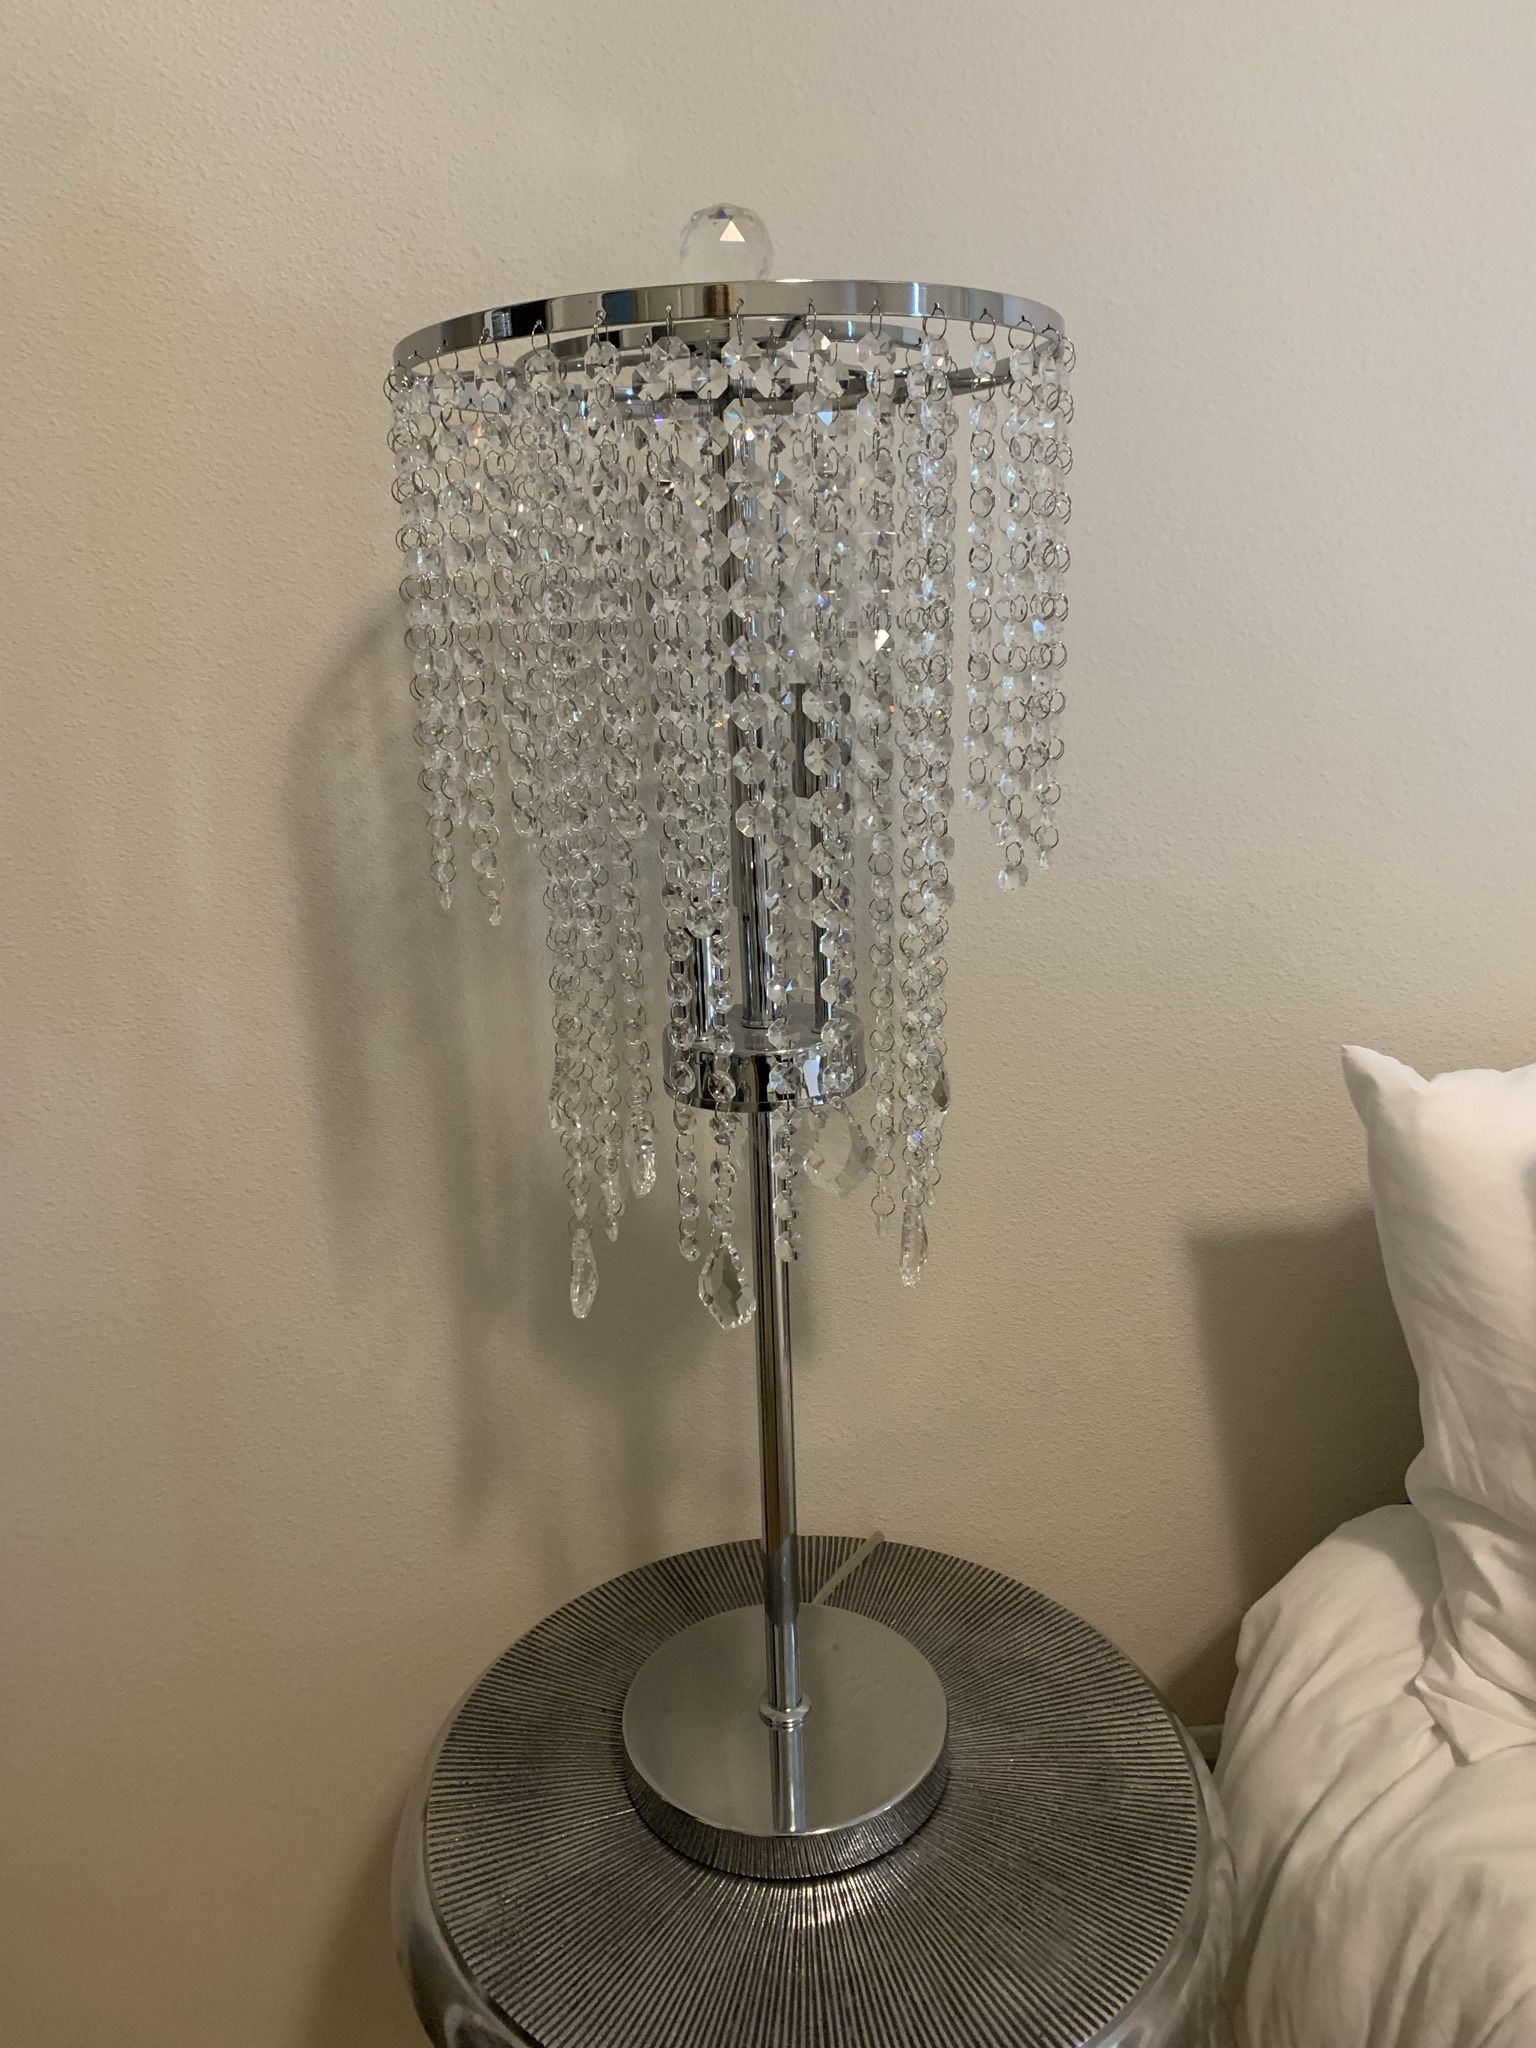 2 Crystal Beaded Lamps